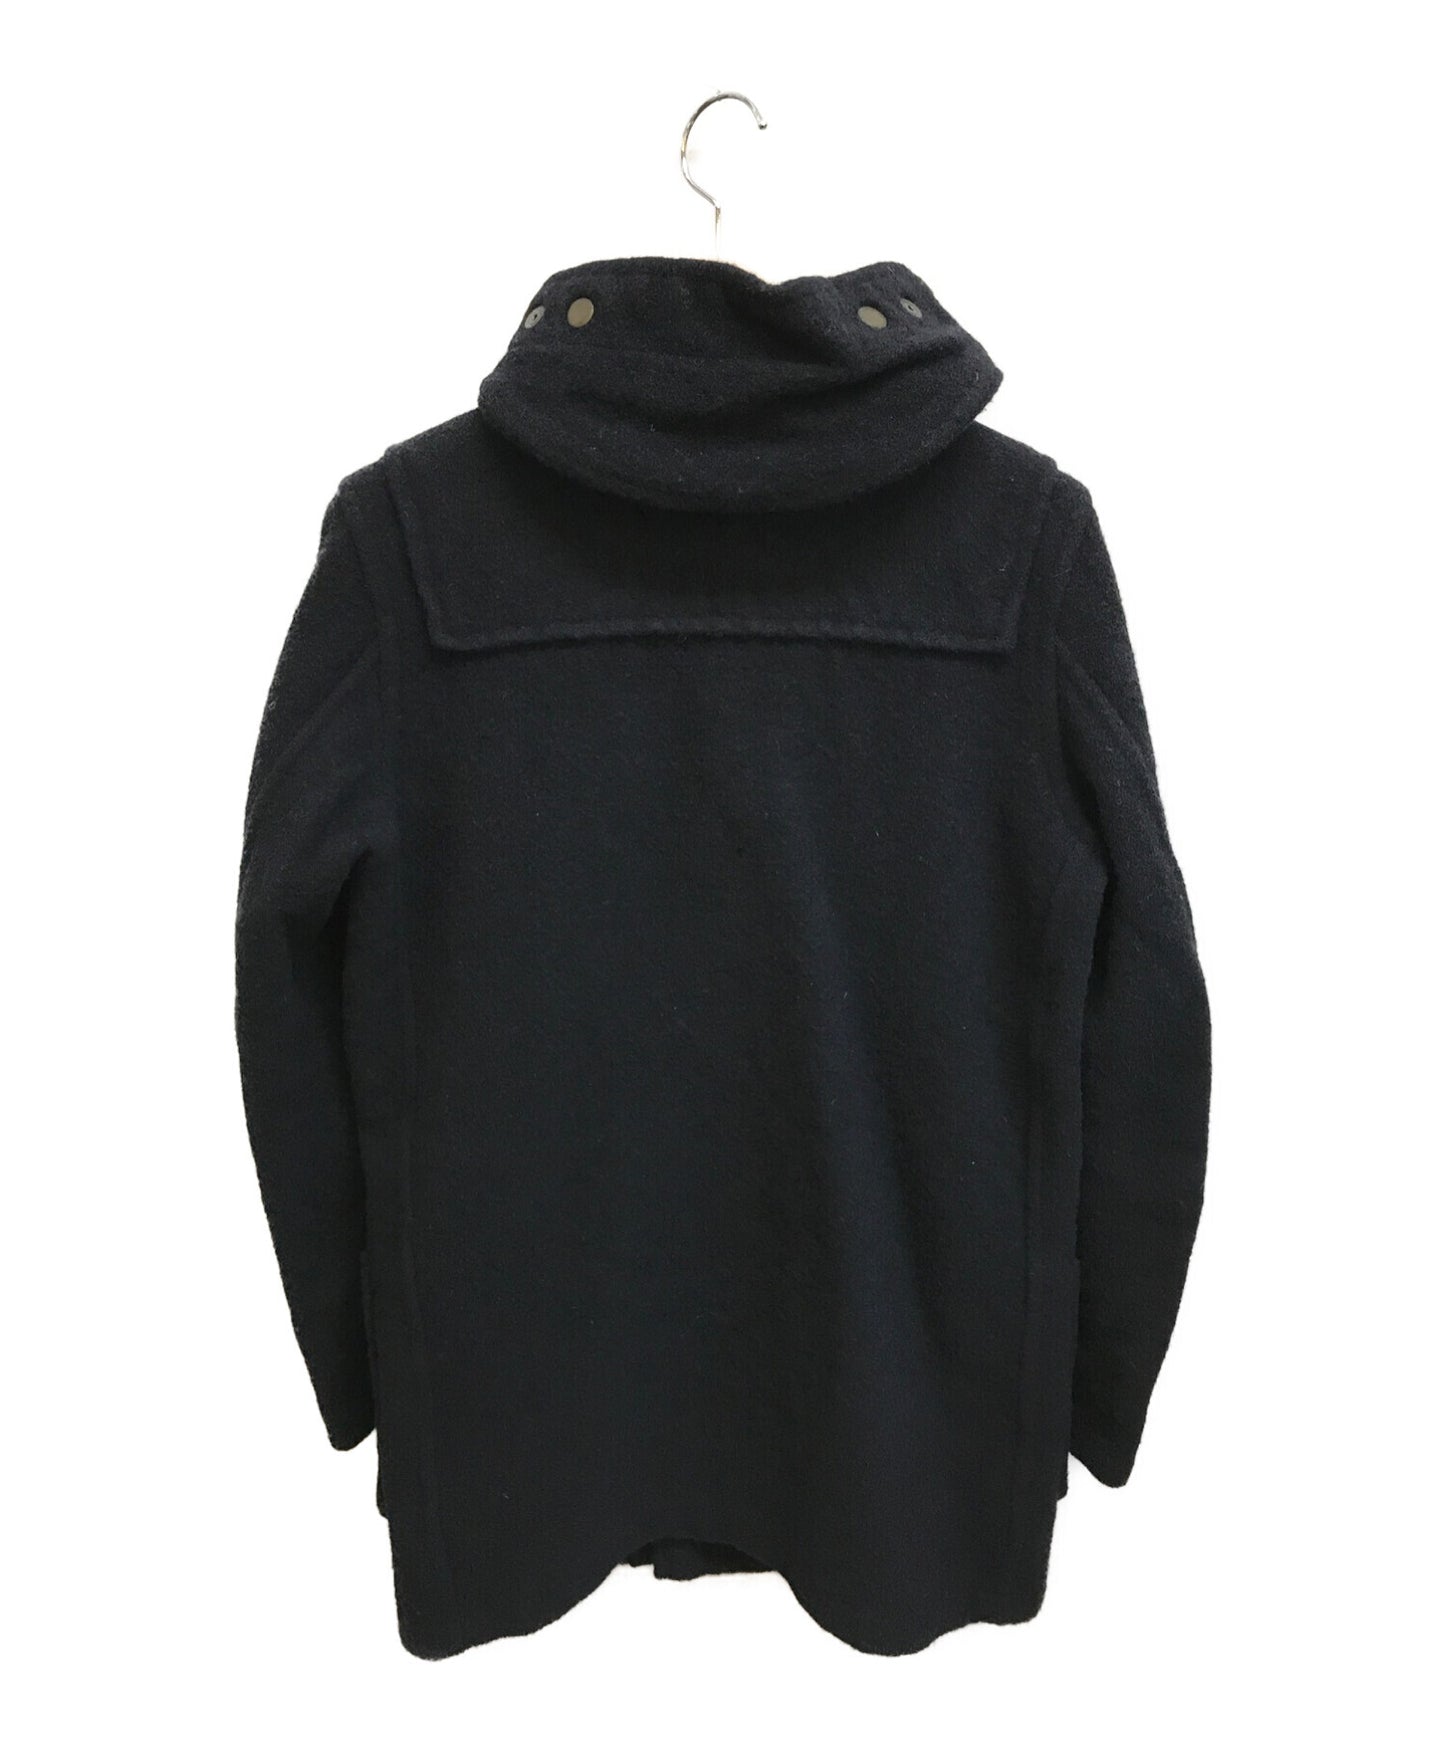 Comme des Garcons Homme X Gloverall Duffle外套HL-C015